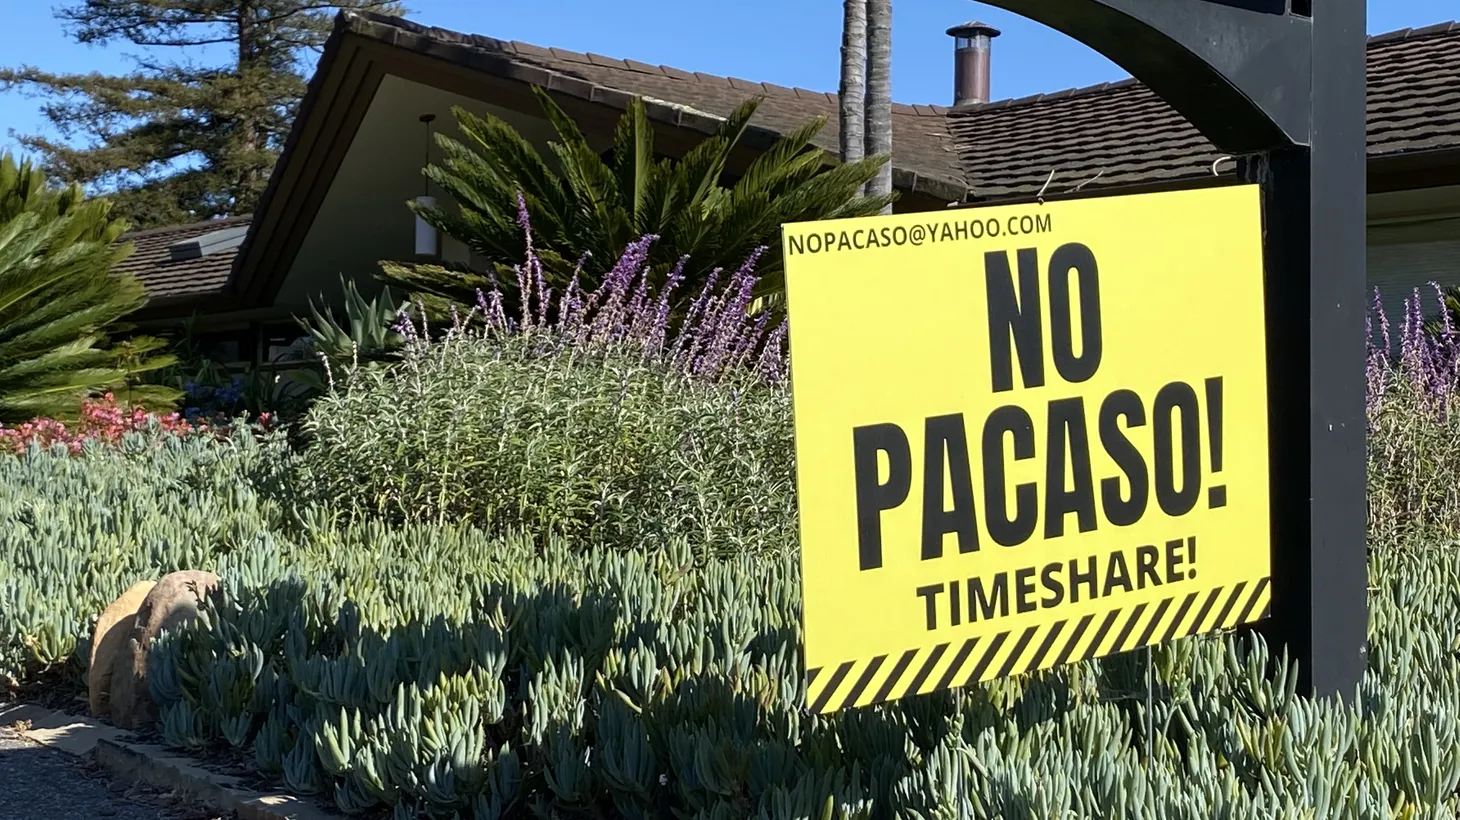 Bright yellow signs declare opposition to real estate startup Pacaso in Santa Barbara, one of many California communities wrestling with how to regulate the company.